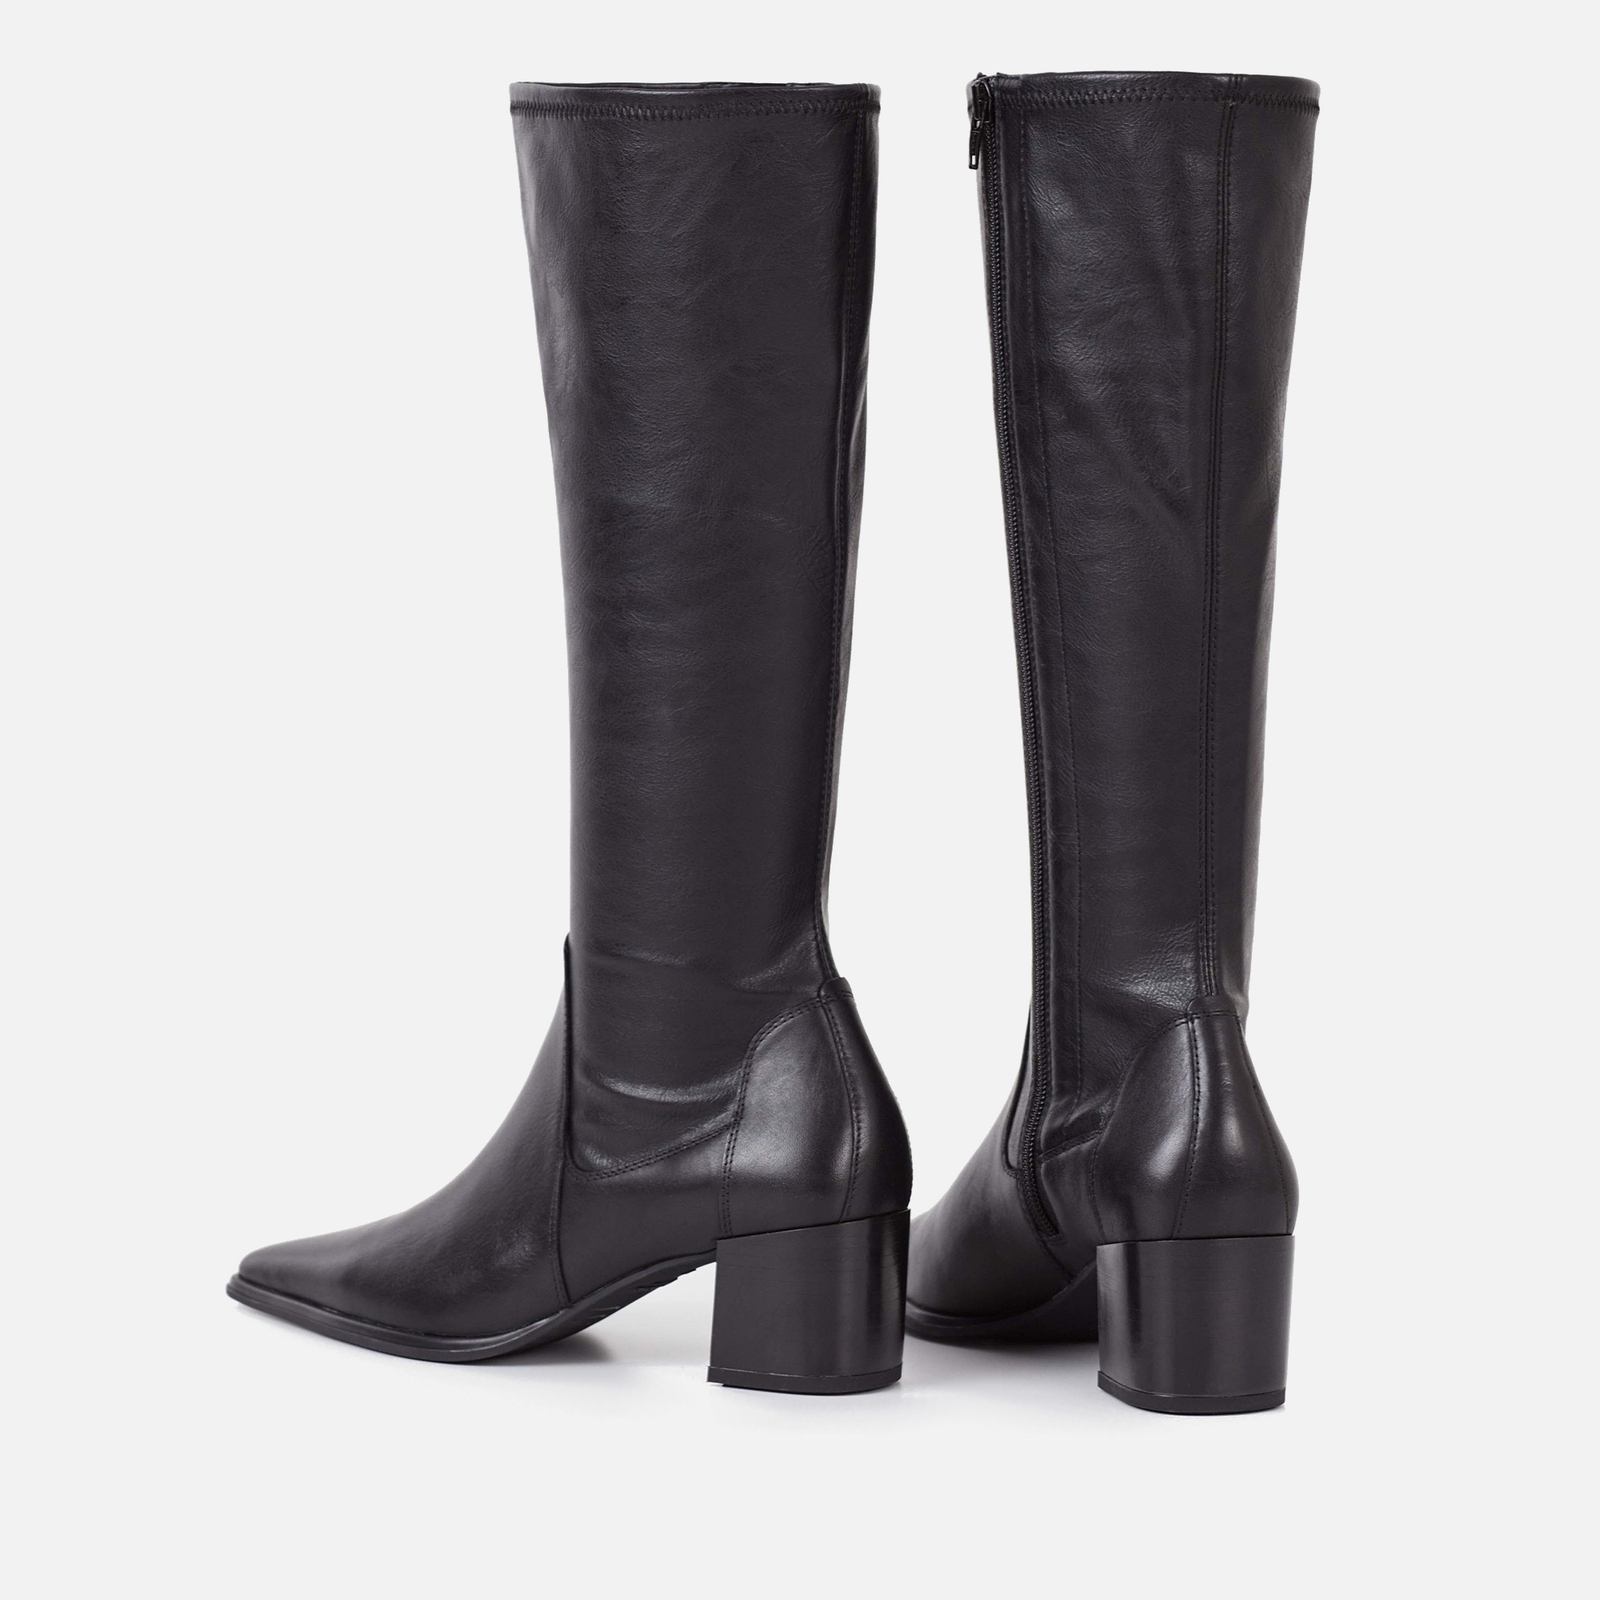 vagabond women's giselle leather and faux leather knee high boots - uk 3